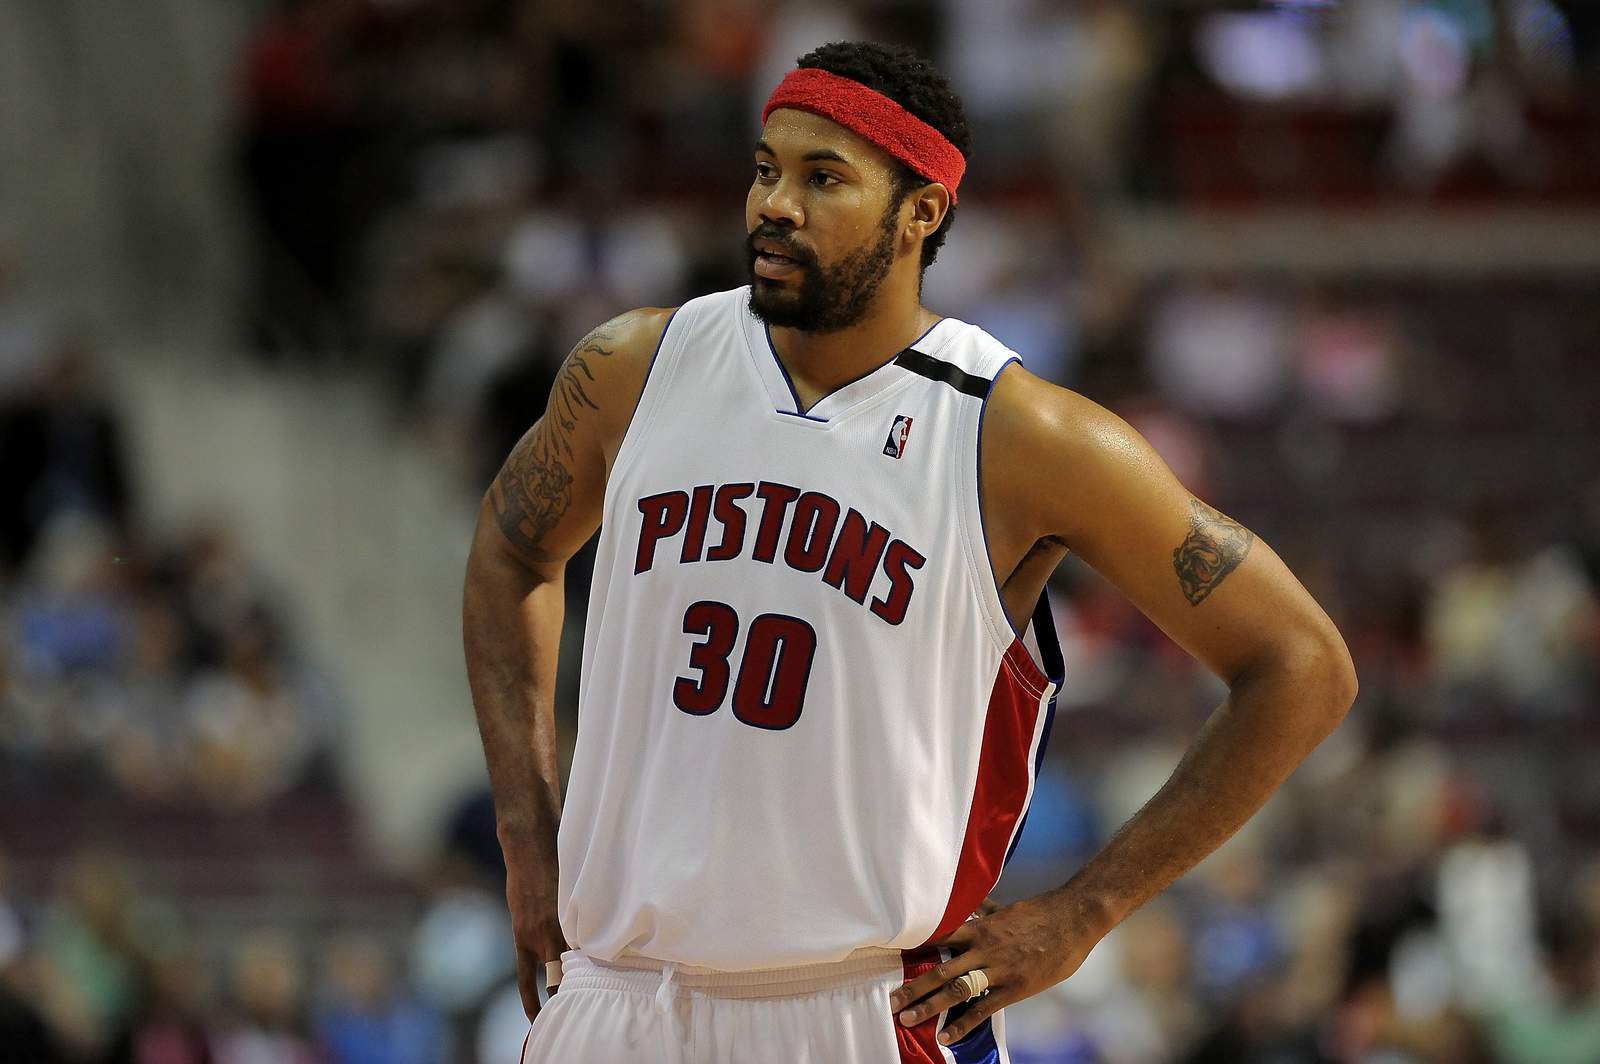 Rasheed Wallace upset with Pistons move from Palace, says ownership disconnected